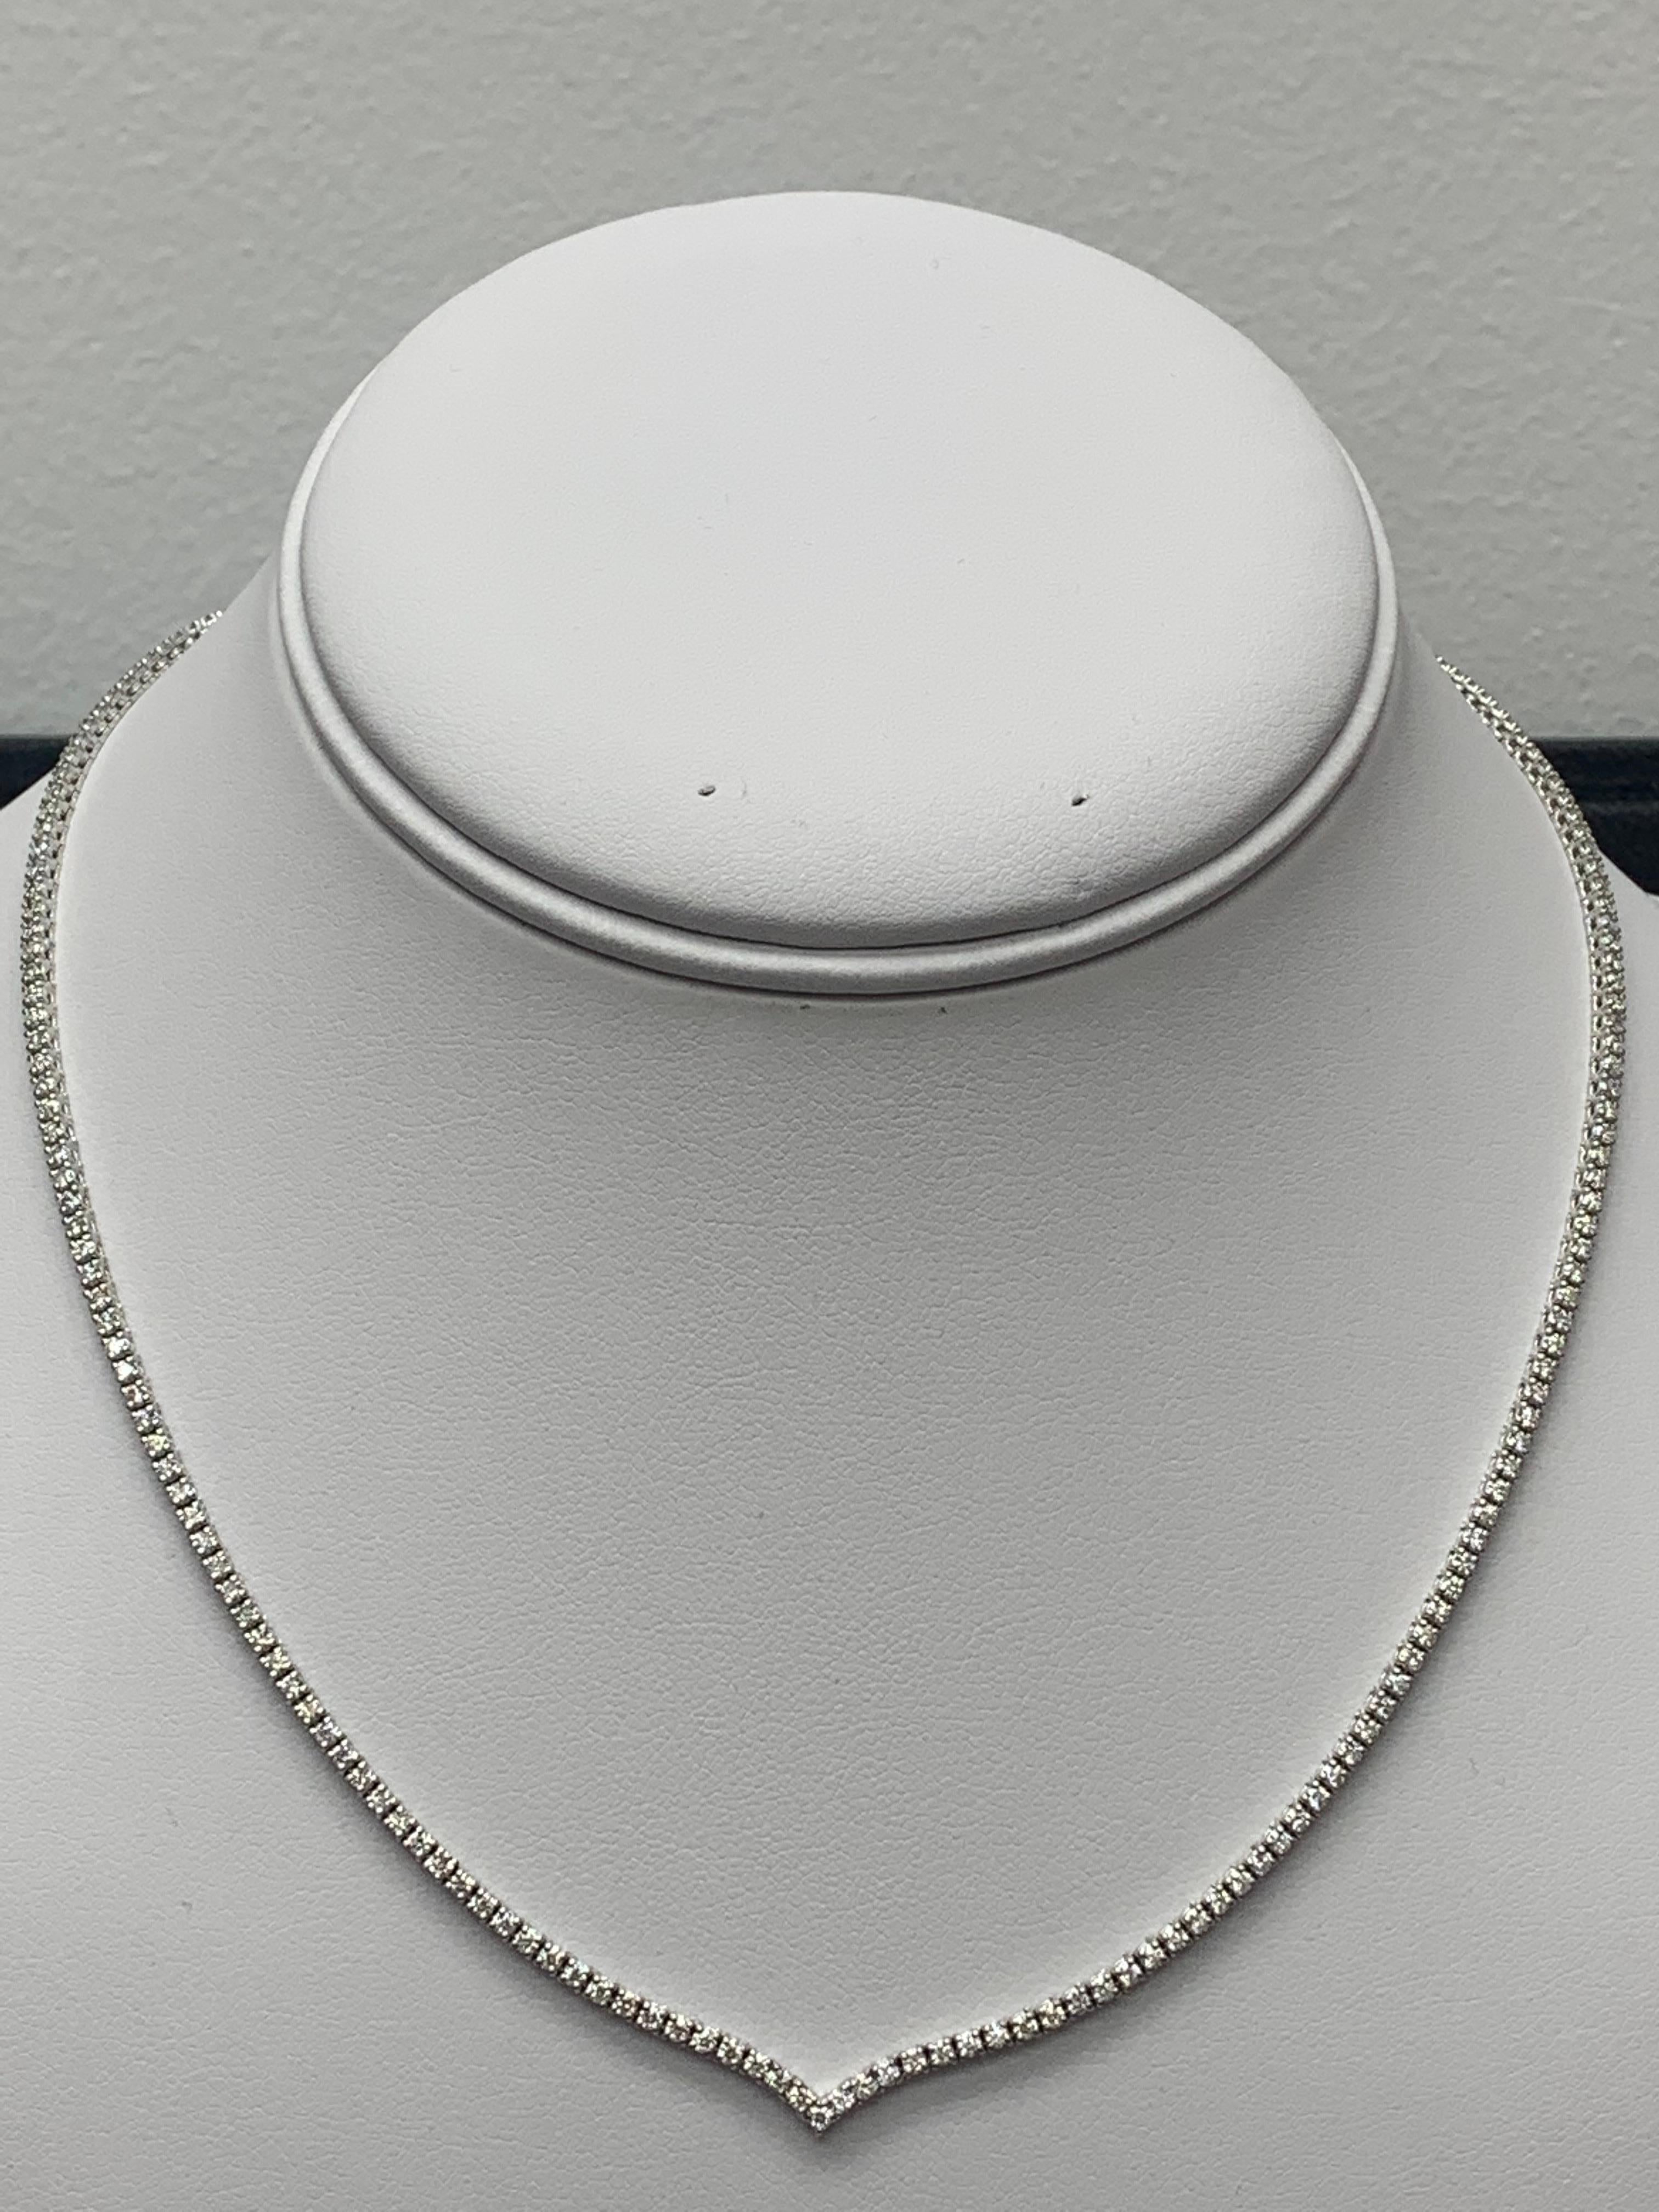 3.58 Carat Diamond Tennis Necklace in 14K White Gold In New Condition For Sale In NEW YORK, NY